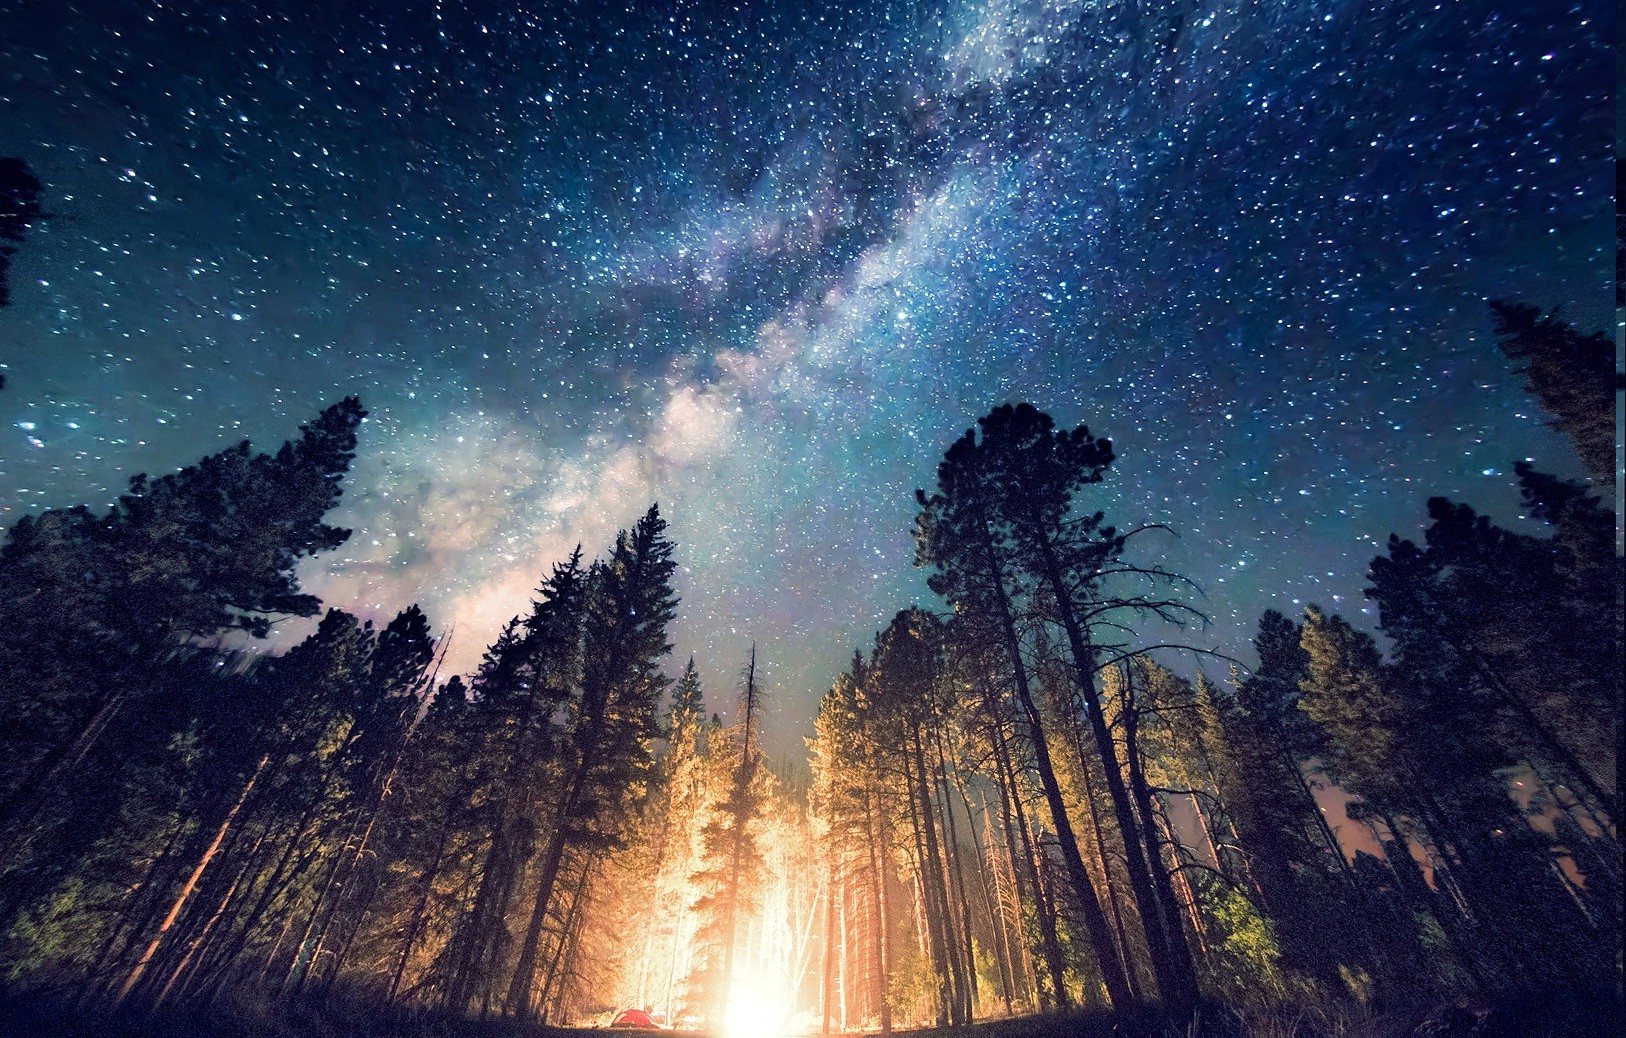 forest, Camping, Starry Night, Trees, Milky Way, Long Exposure, Lights